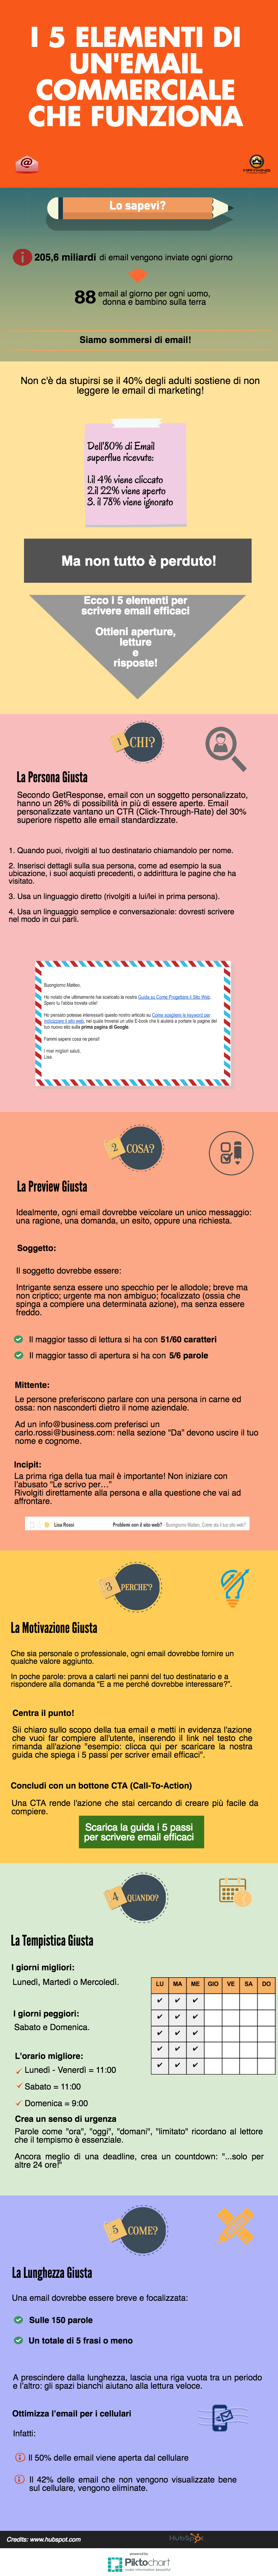 Come scrivere email commerciali efficaci